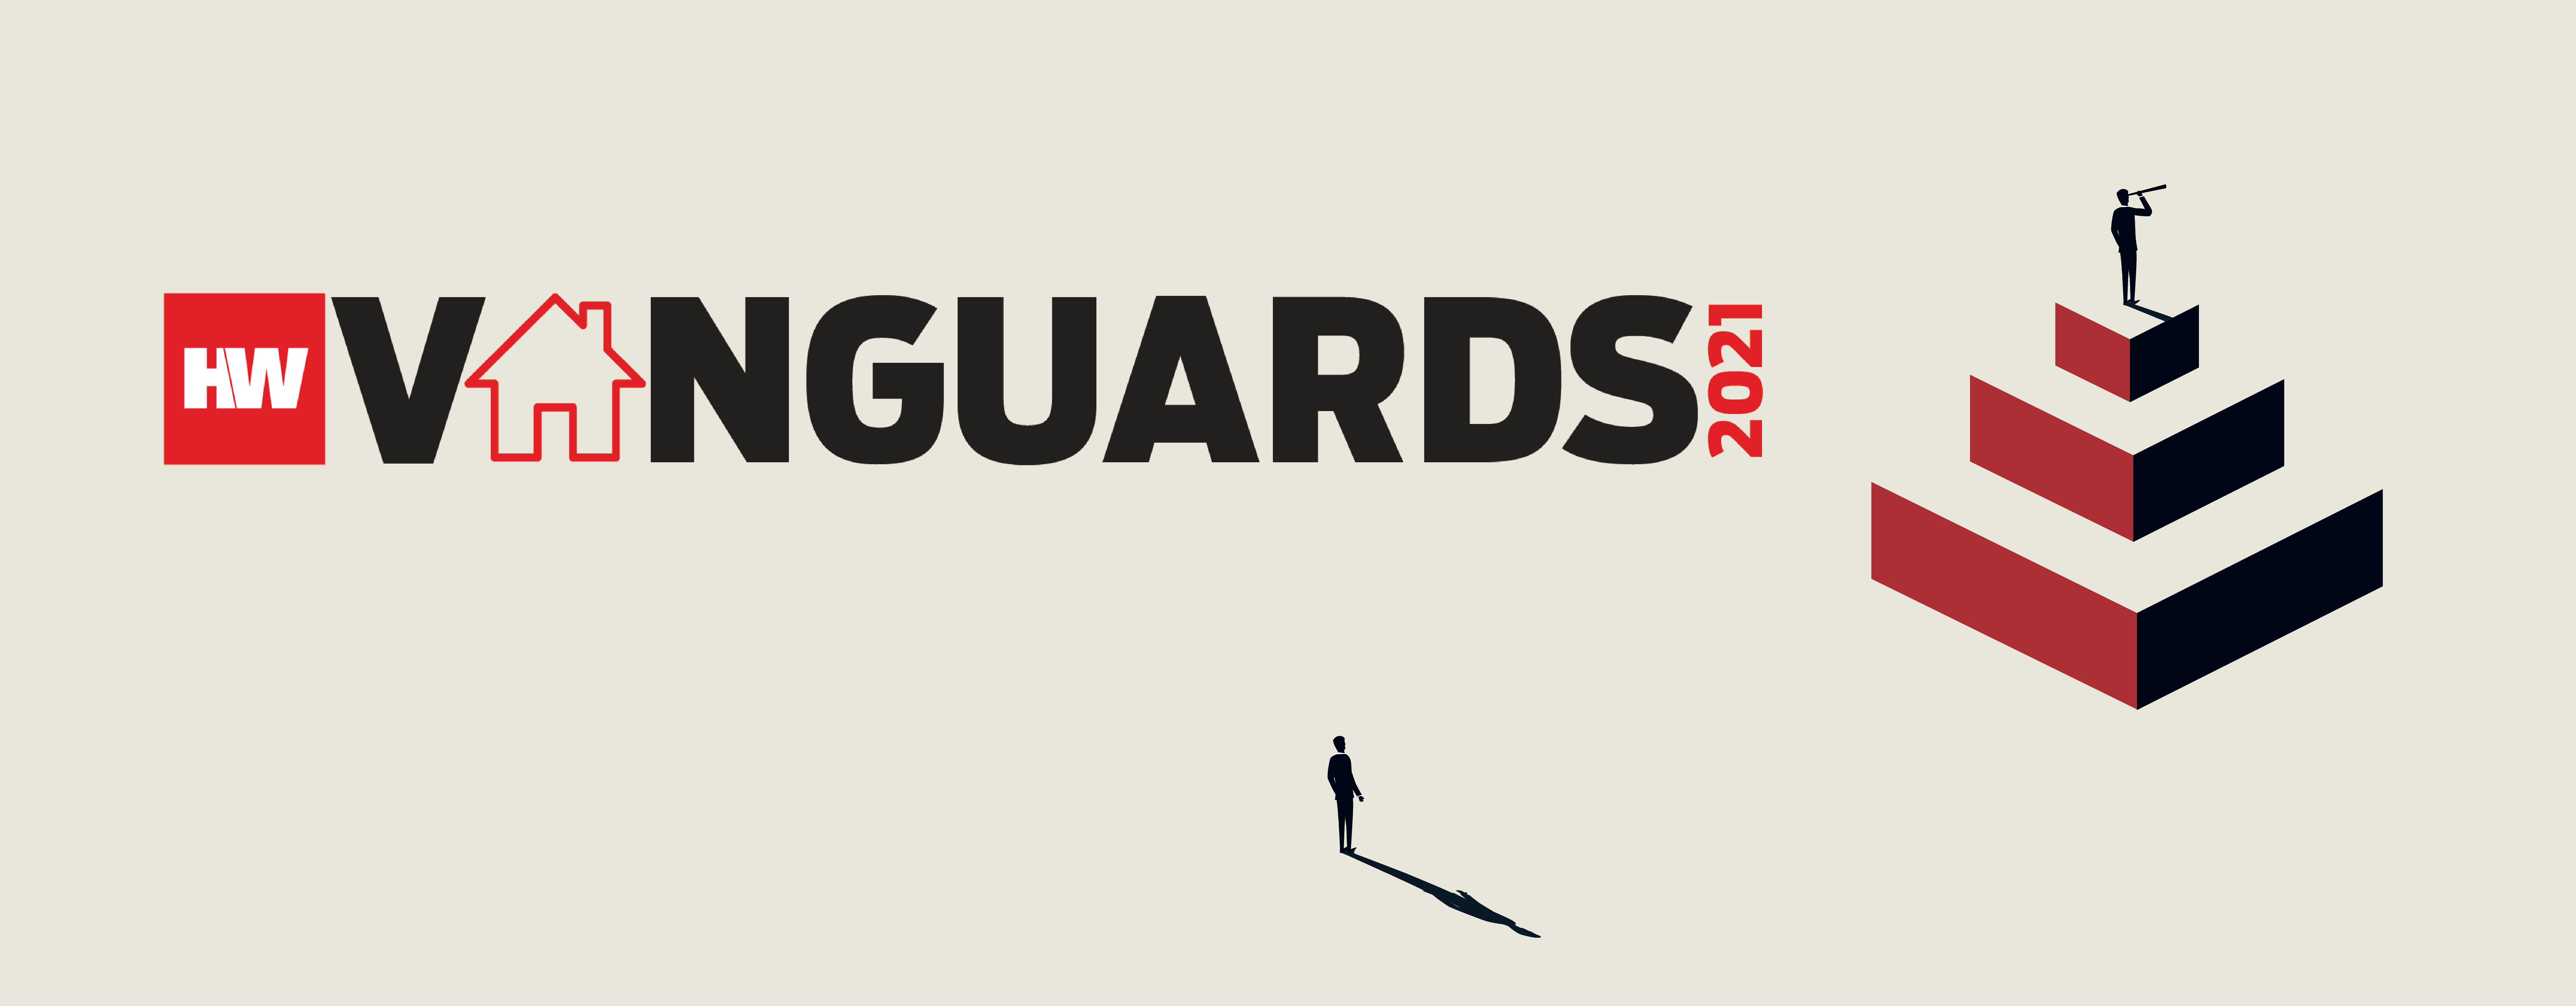 Introducing the 2021 HousingWire Vanguards thumbnail